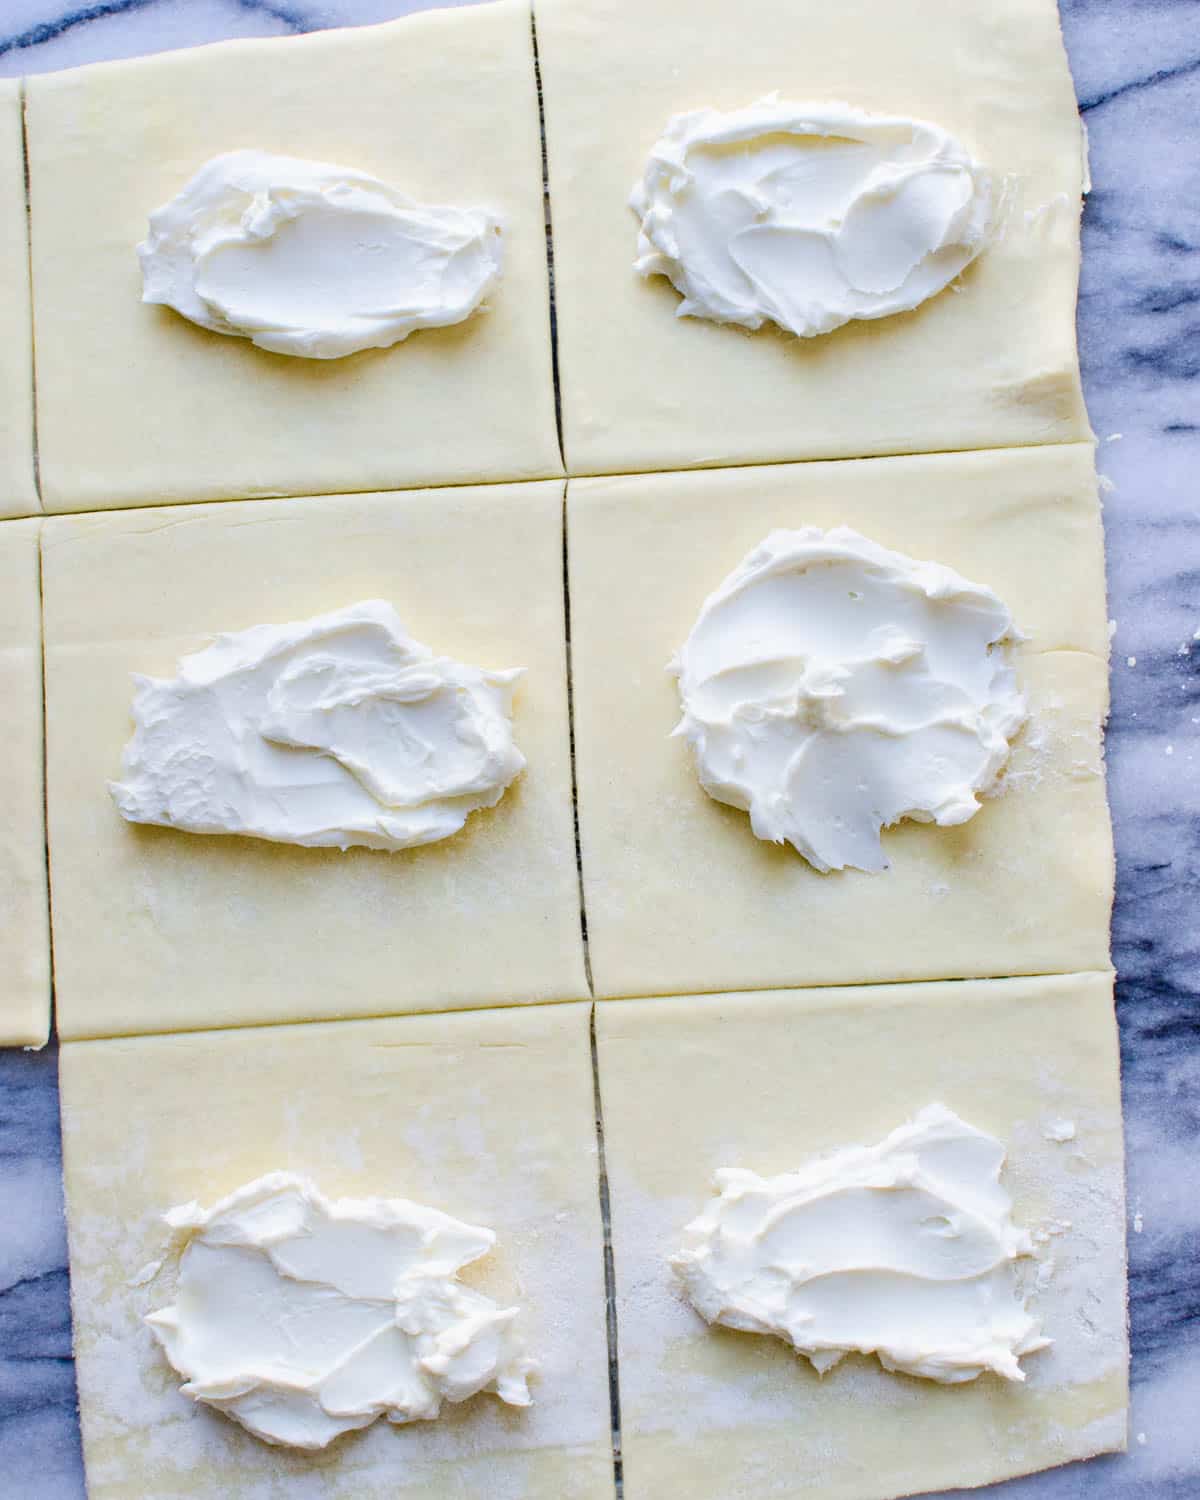 Smearing cream cheese filling into the middle of each square of puff pastry.